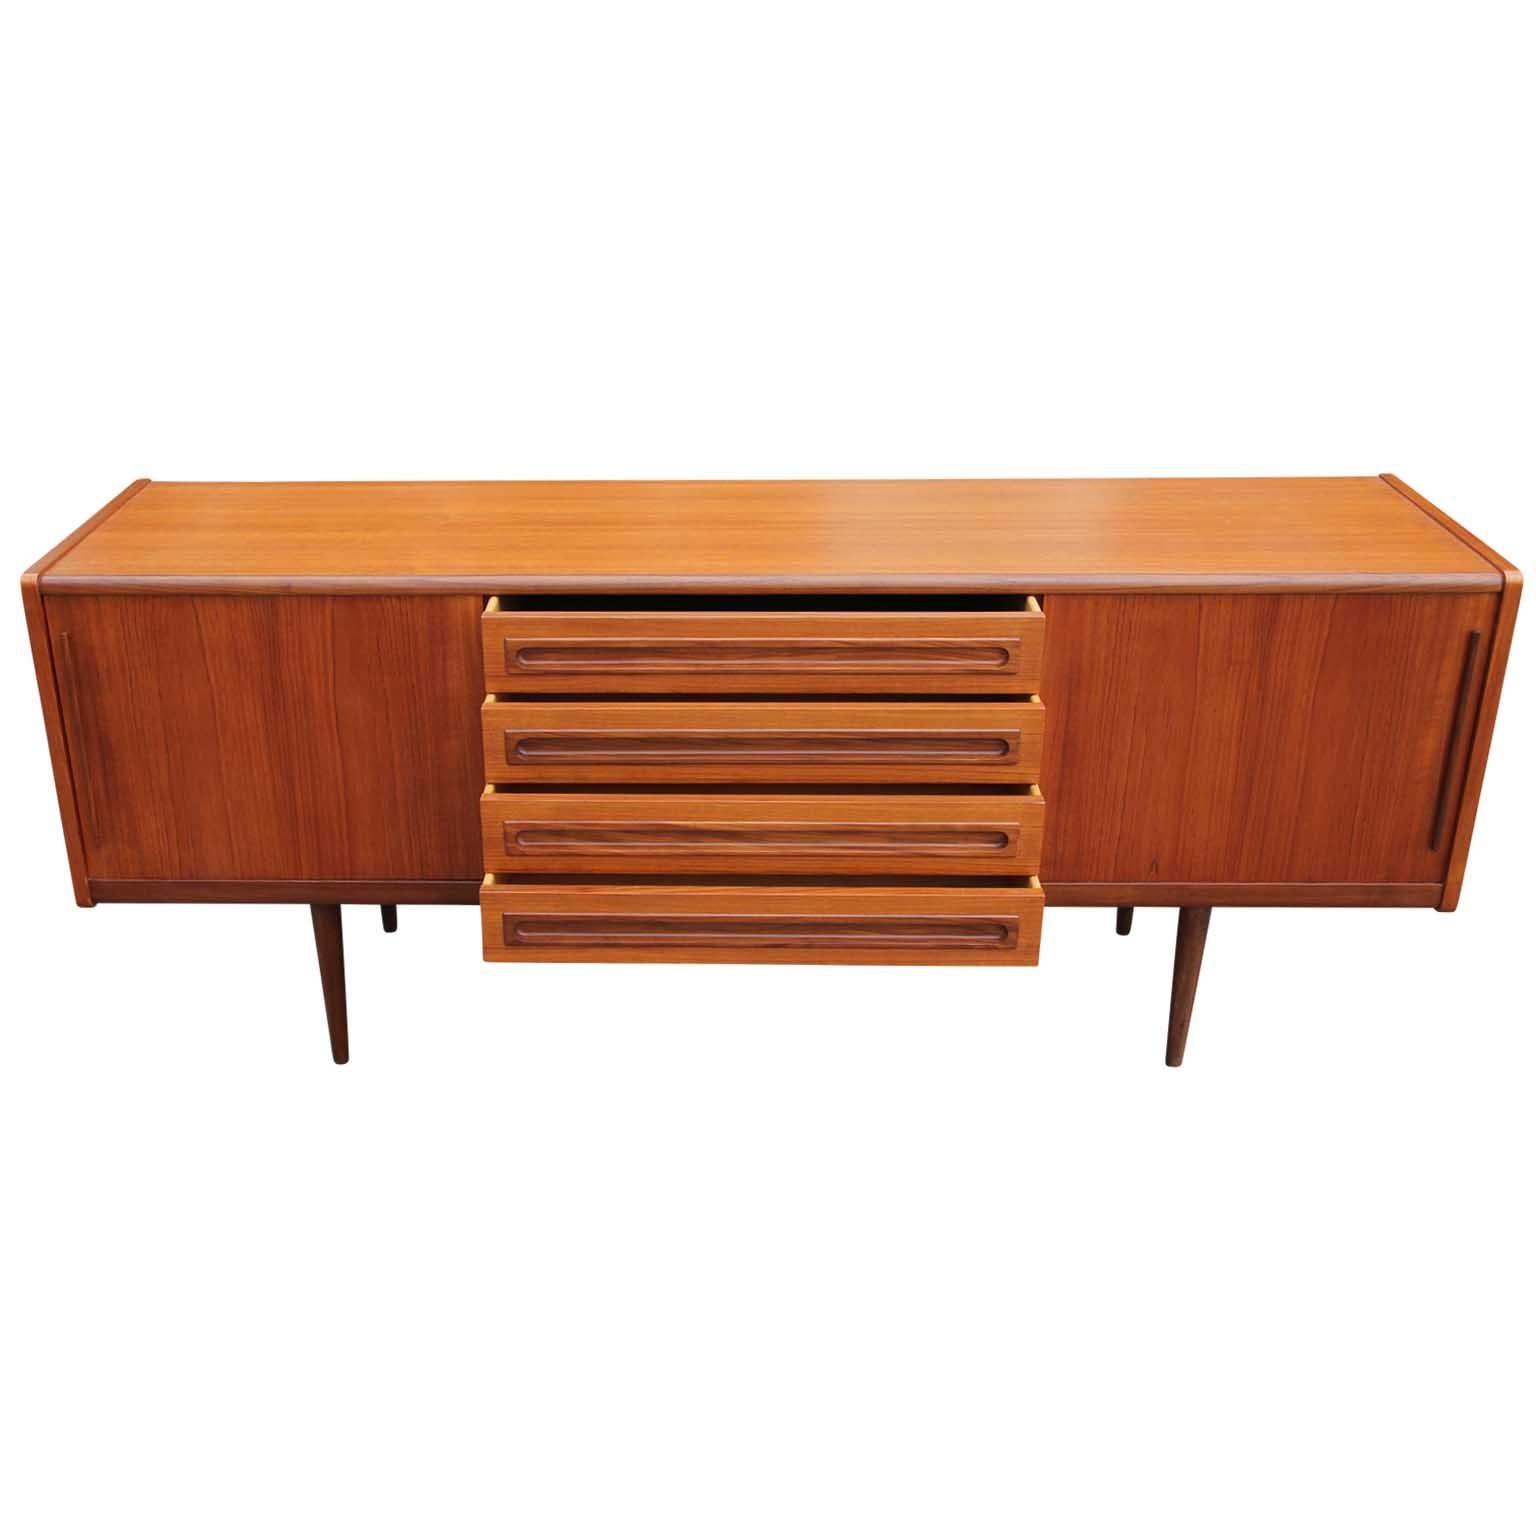 Mid-Century Modern Danish Modern Teak Sideboard / Credenza with Drawers and Sliding Door Cabinets